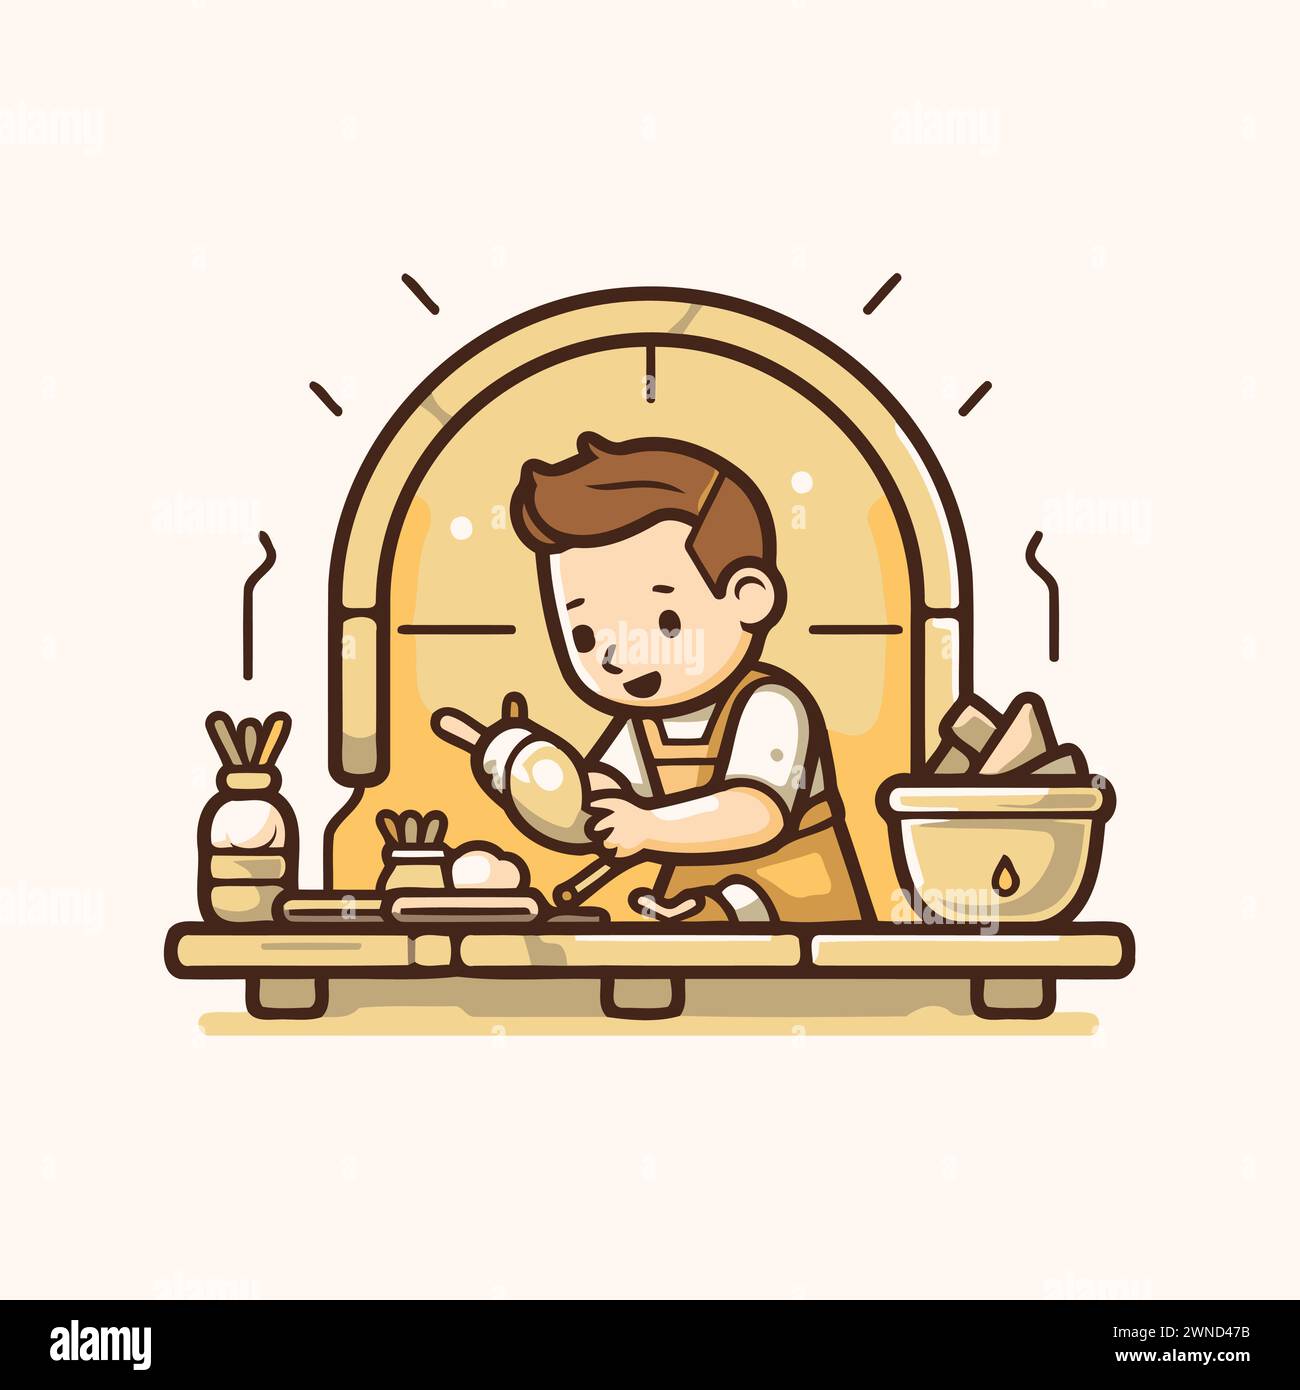 Cute little boy cooking in the kitchen. Vector illustration in cartoon style. Stock Vector